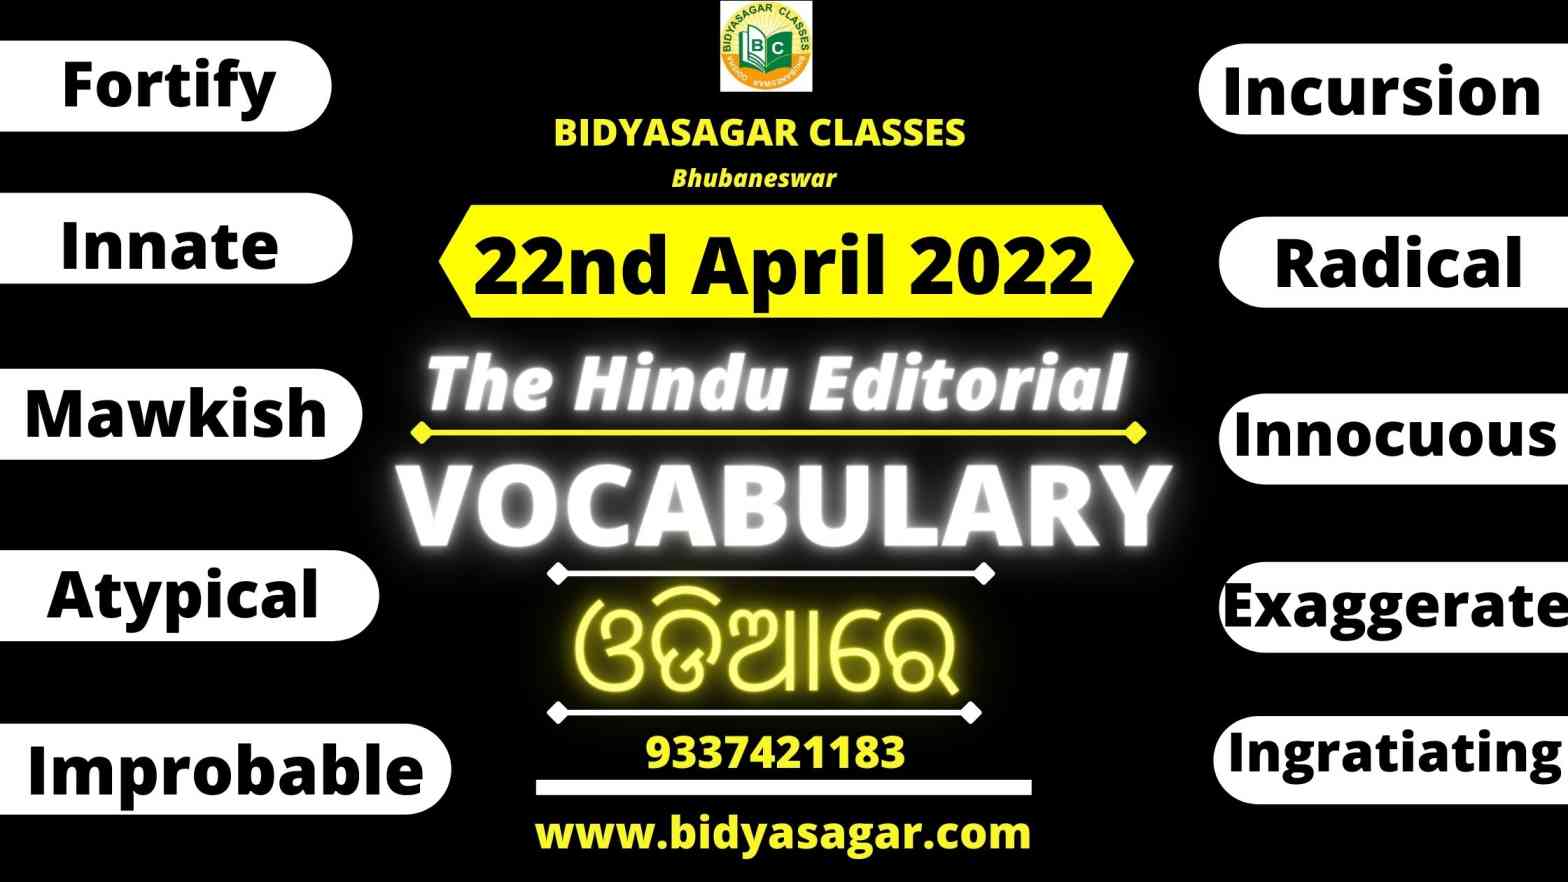 The Hindu Editorial Vocabulary of 22nd April 2022